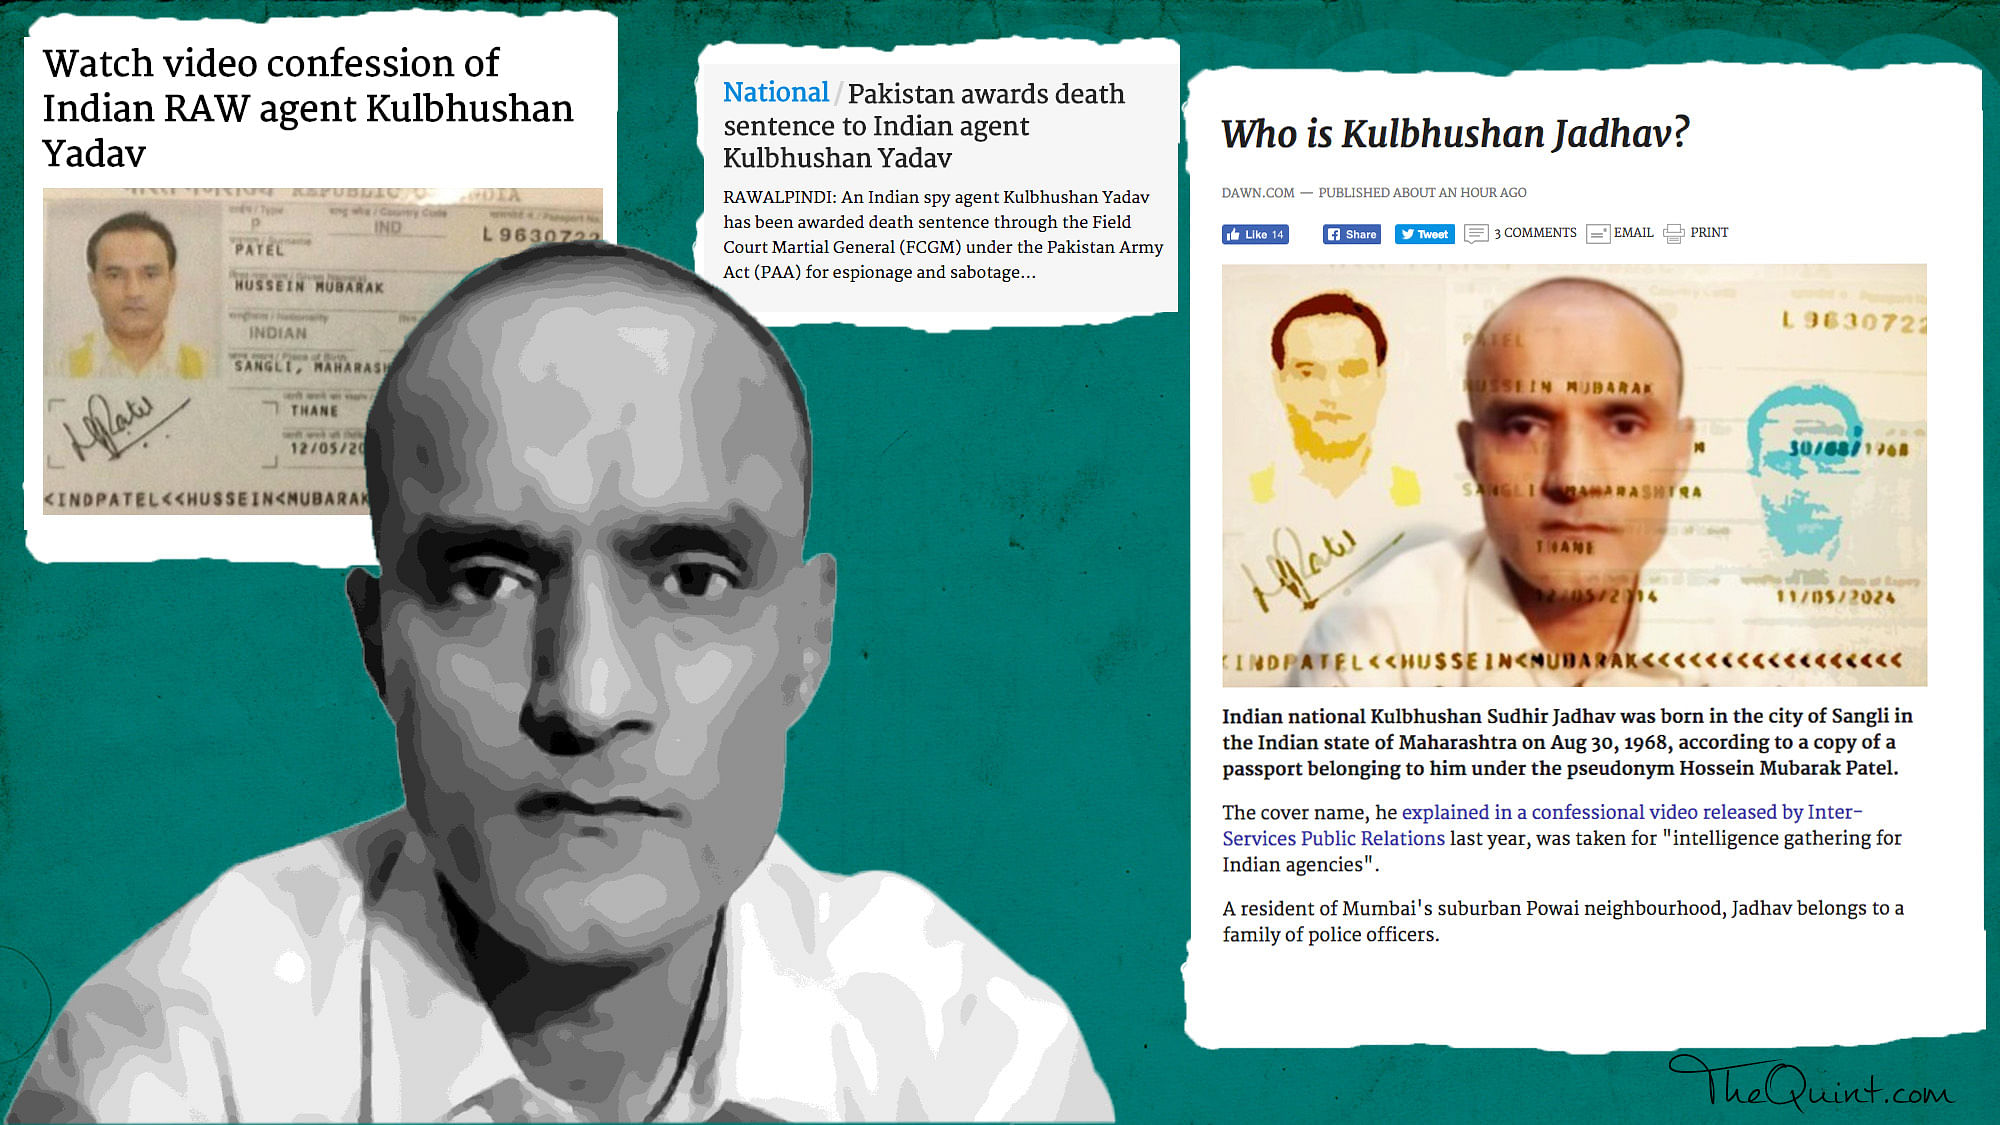 Kulbhushan Jadhav, who Islamabad claims is an Indian spy, was on Monday sentenced to death by a Pakistani military court for espionage and engaging in sabotage. (Photo: <b>The Quint</b>)